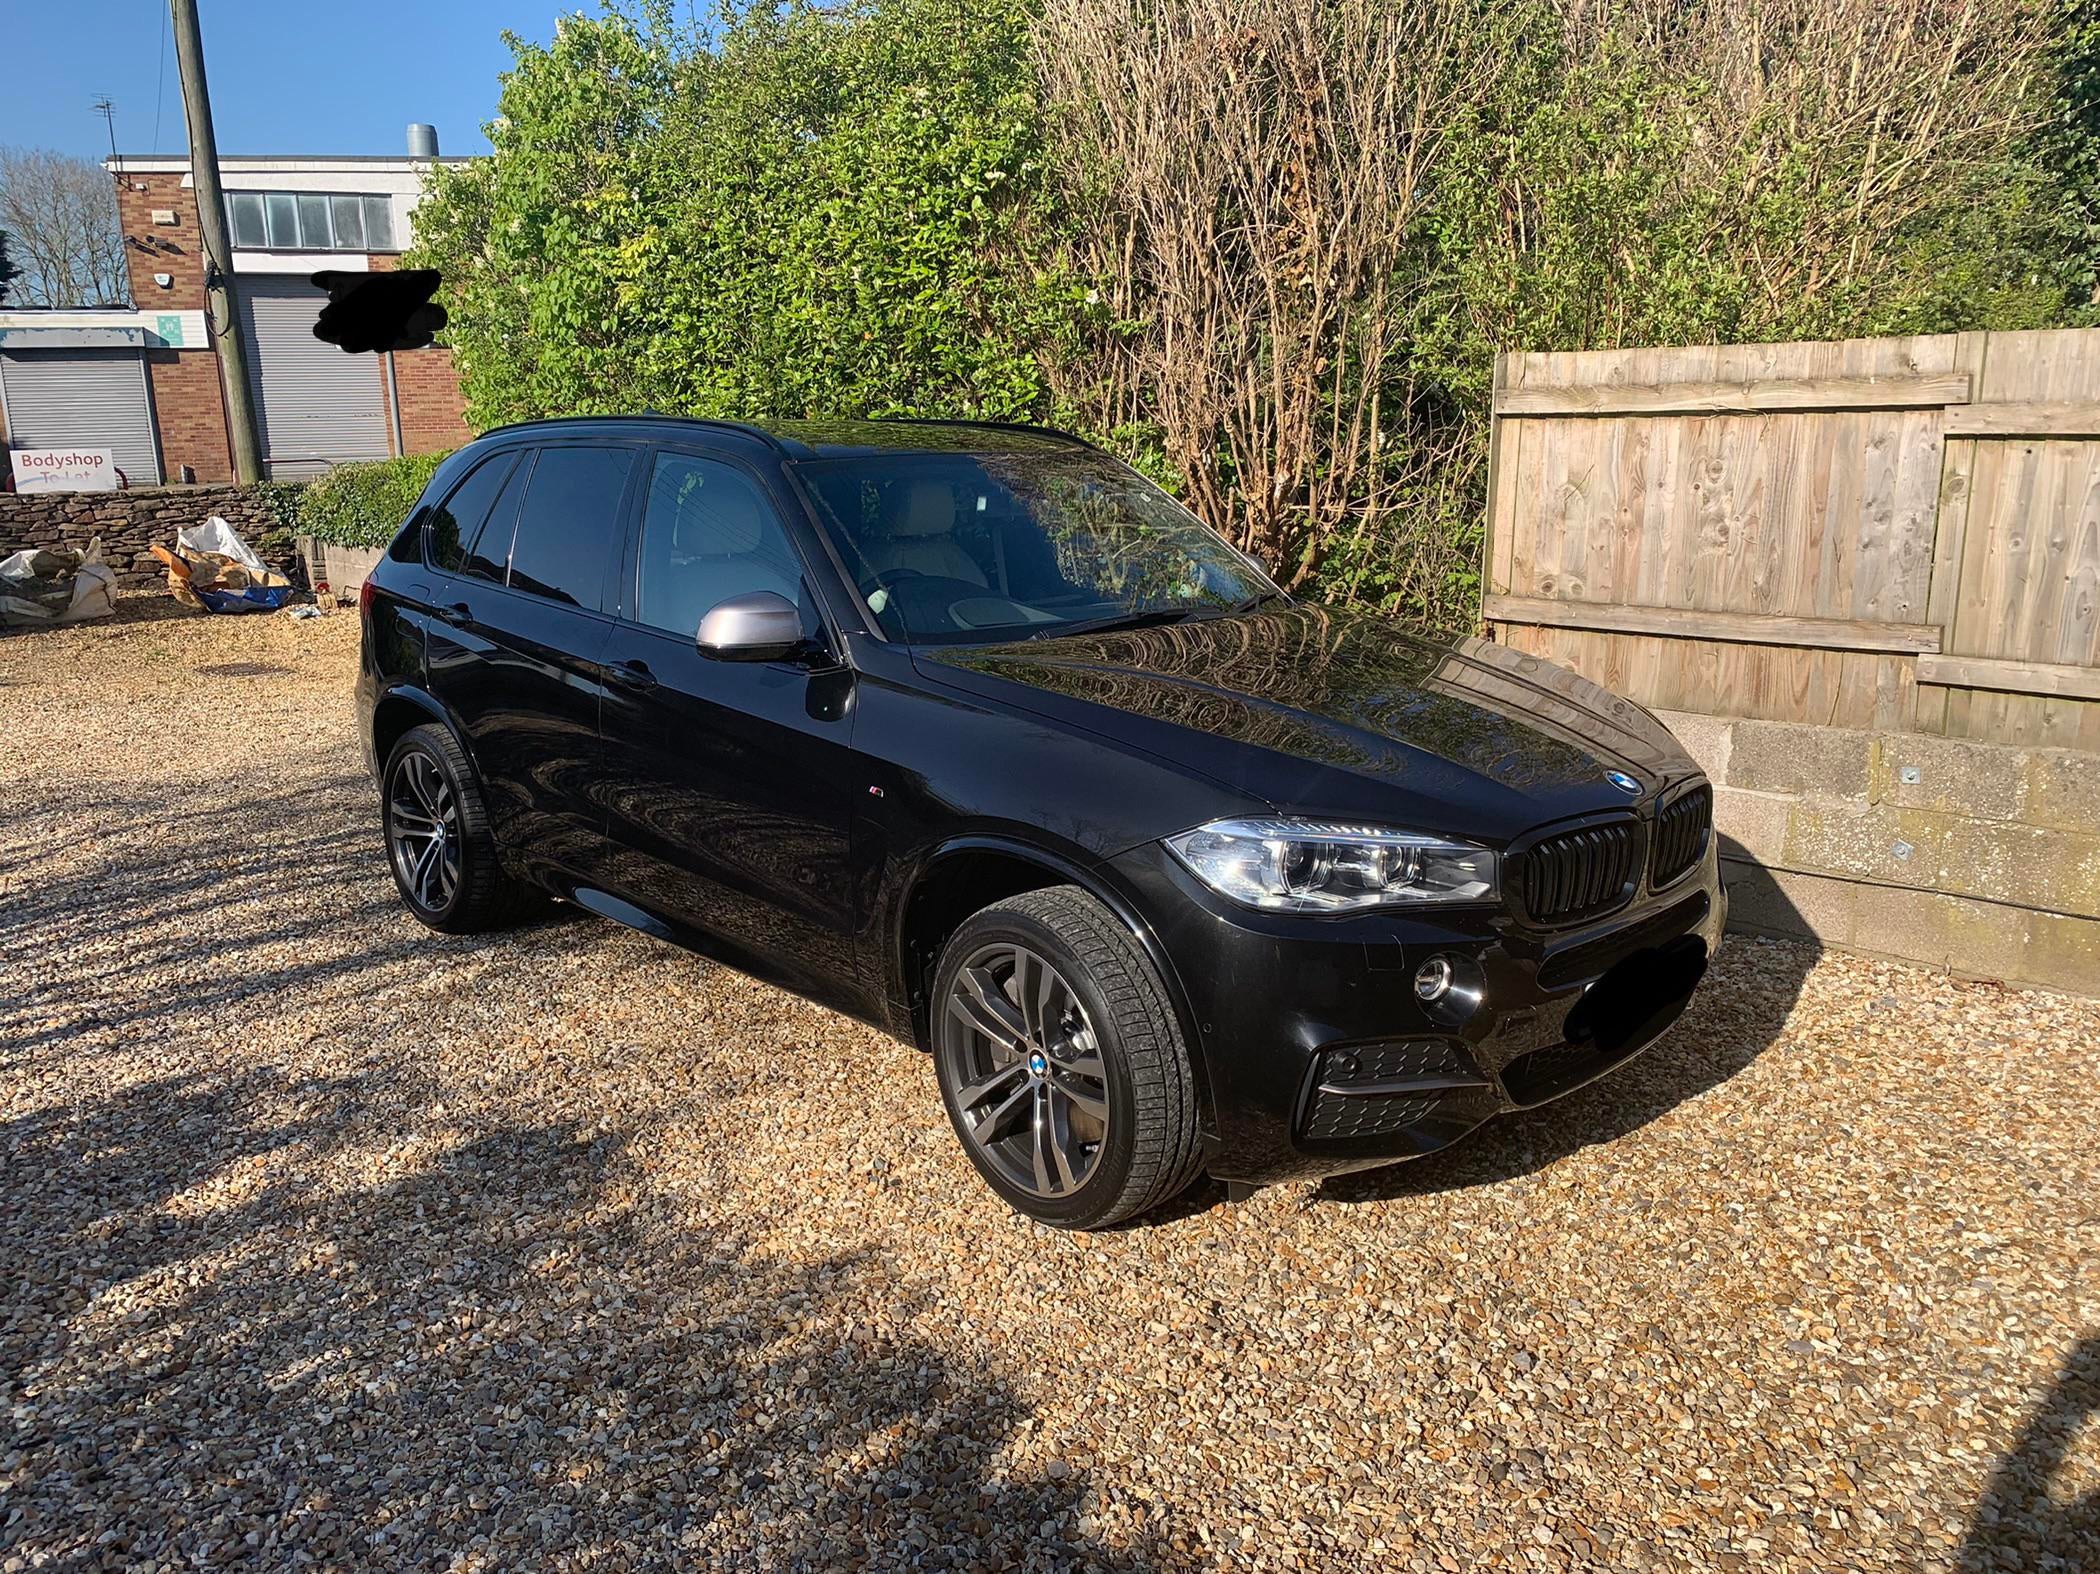 New (to me) 2016 X5 M50D - loving the all black trim + ivory interior  combo. : r/BMW